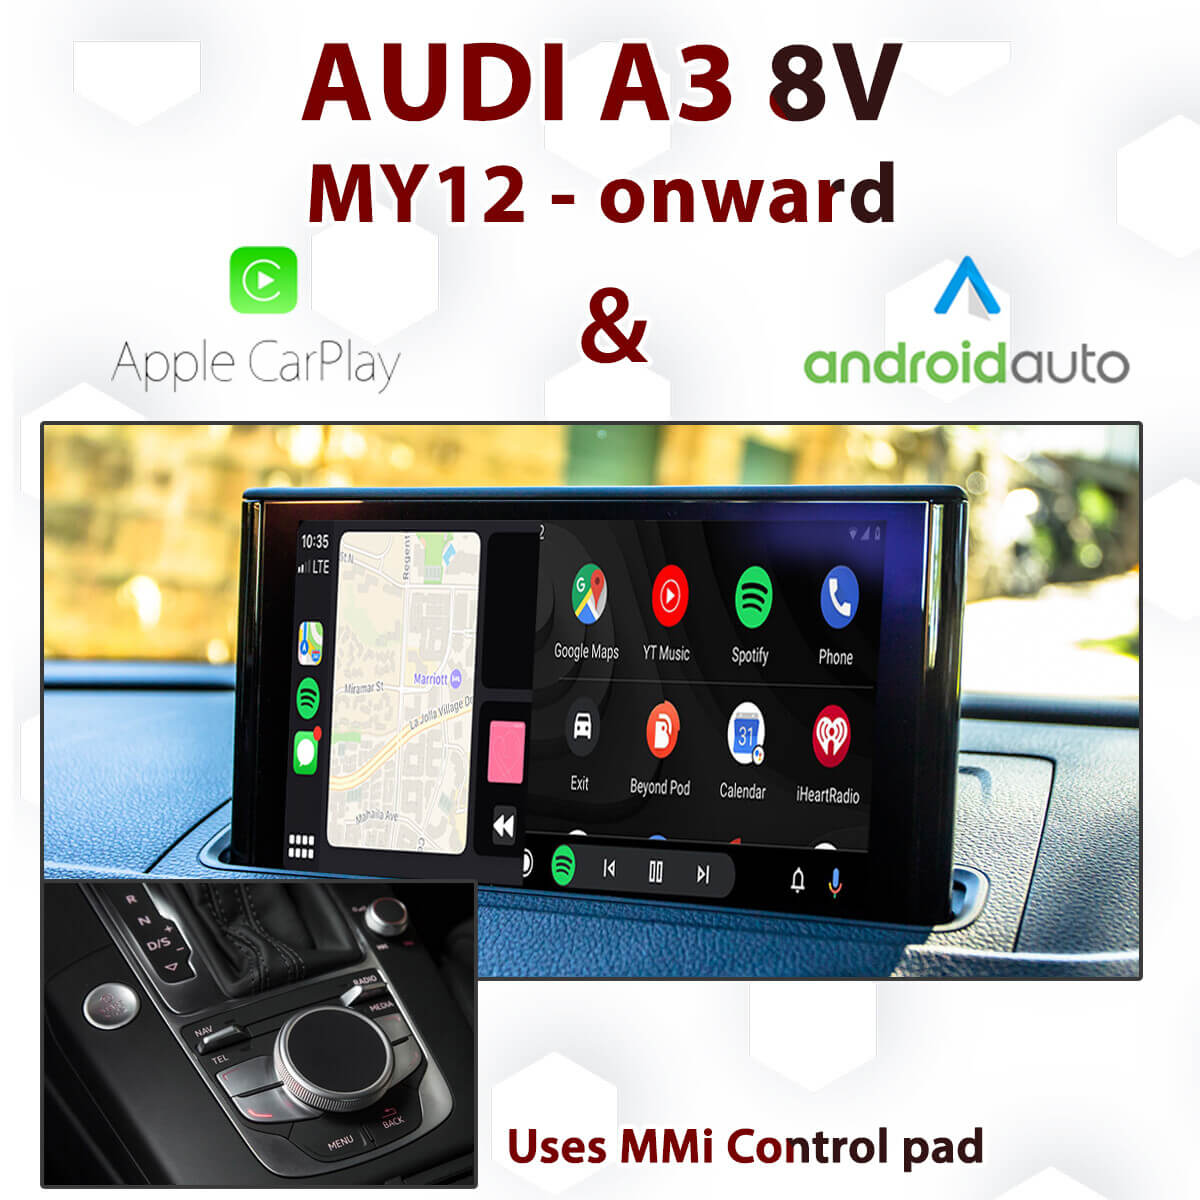 Tuto intégration Apple Carplay / Android Auto sur A3 8V (Page 1